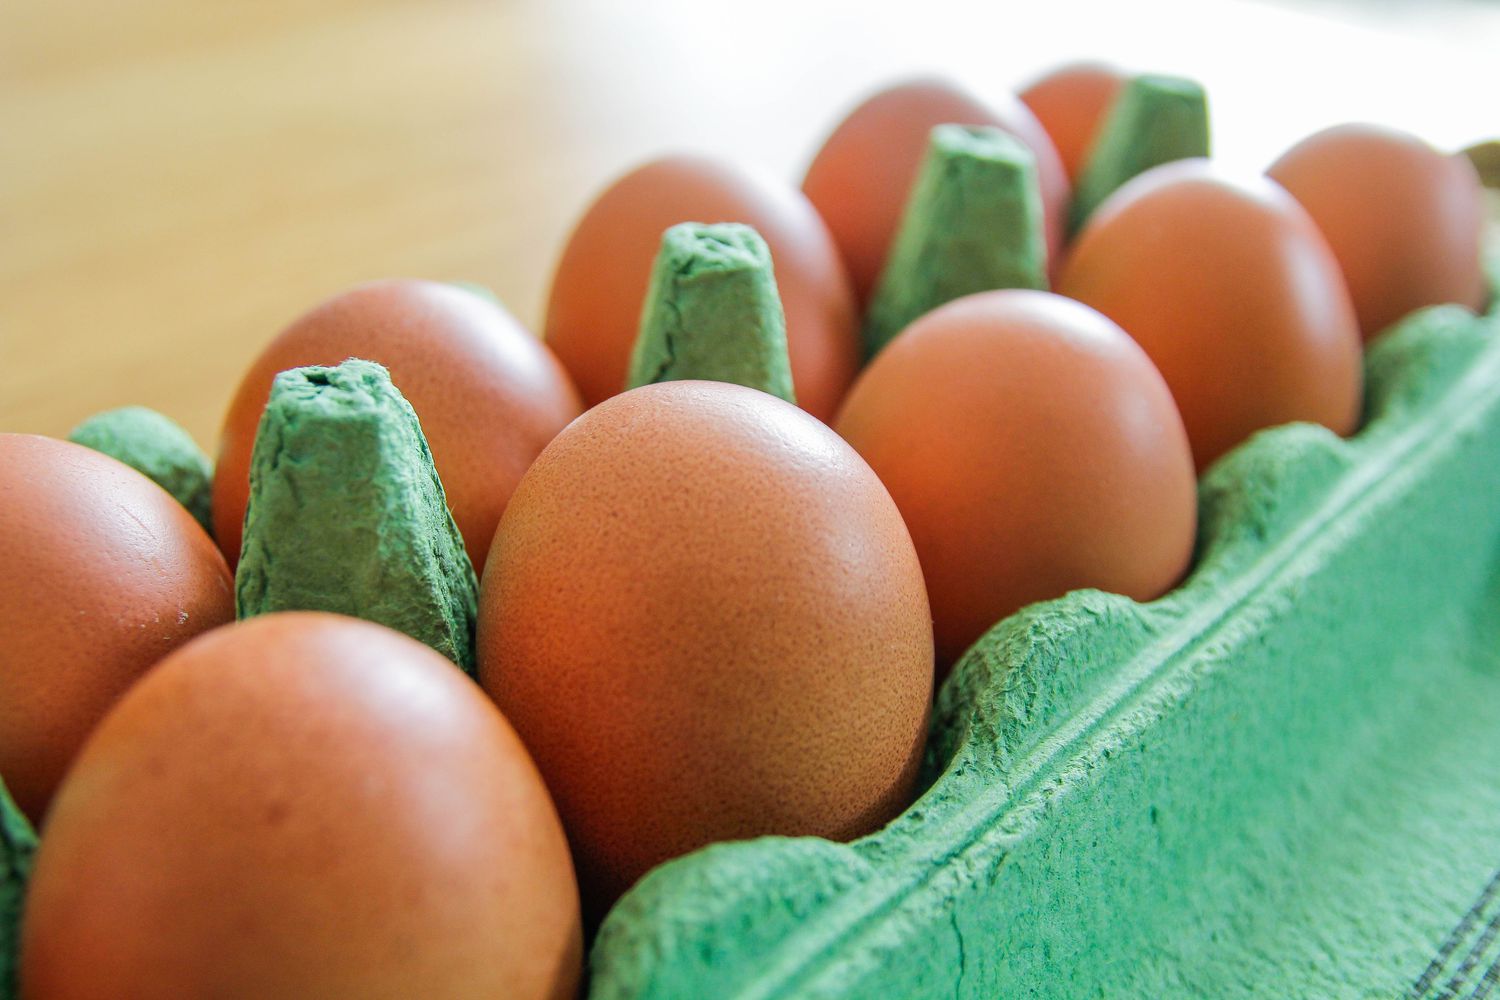 How Long Can Eggs Stay Out Of The Refrigerator